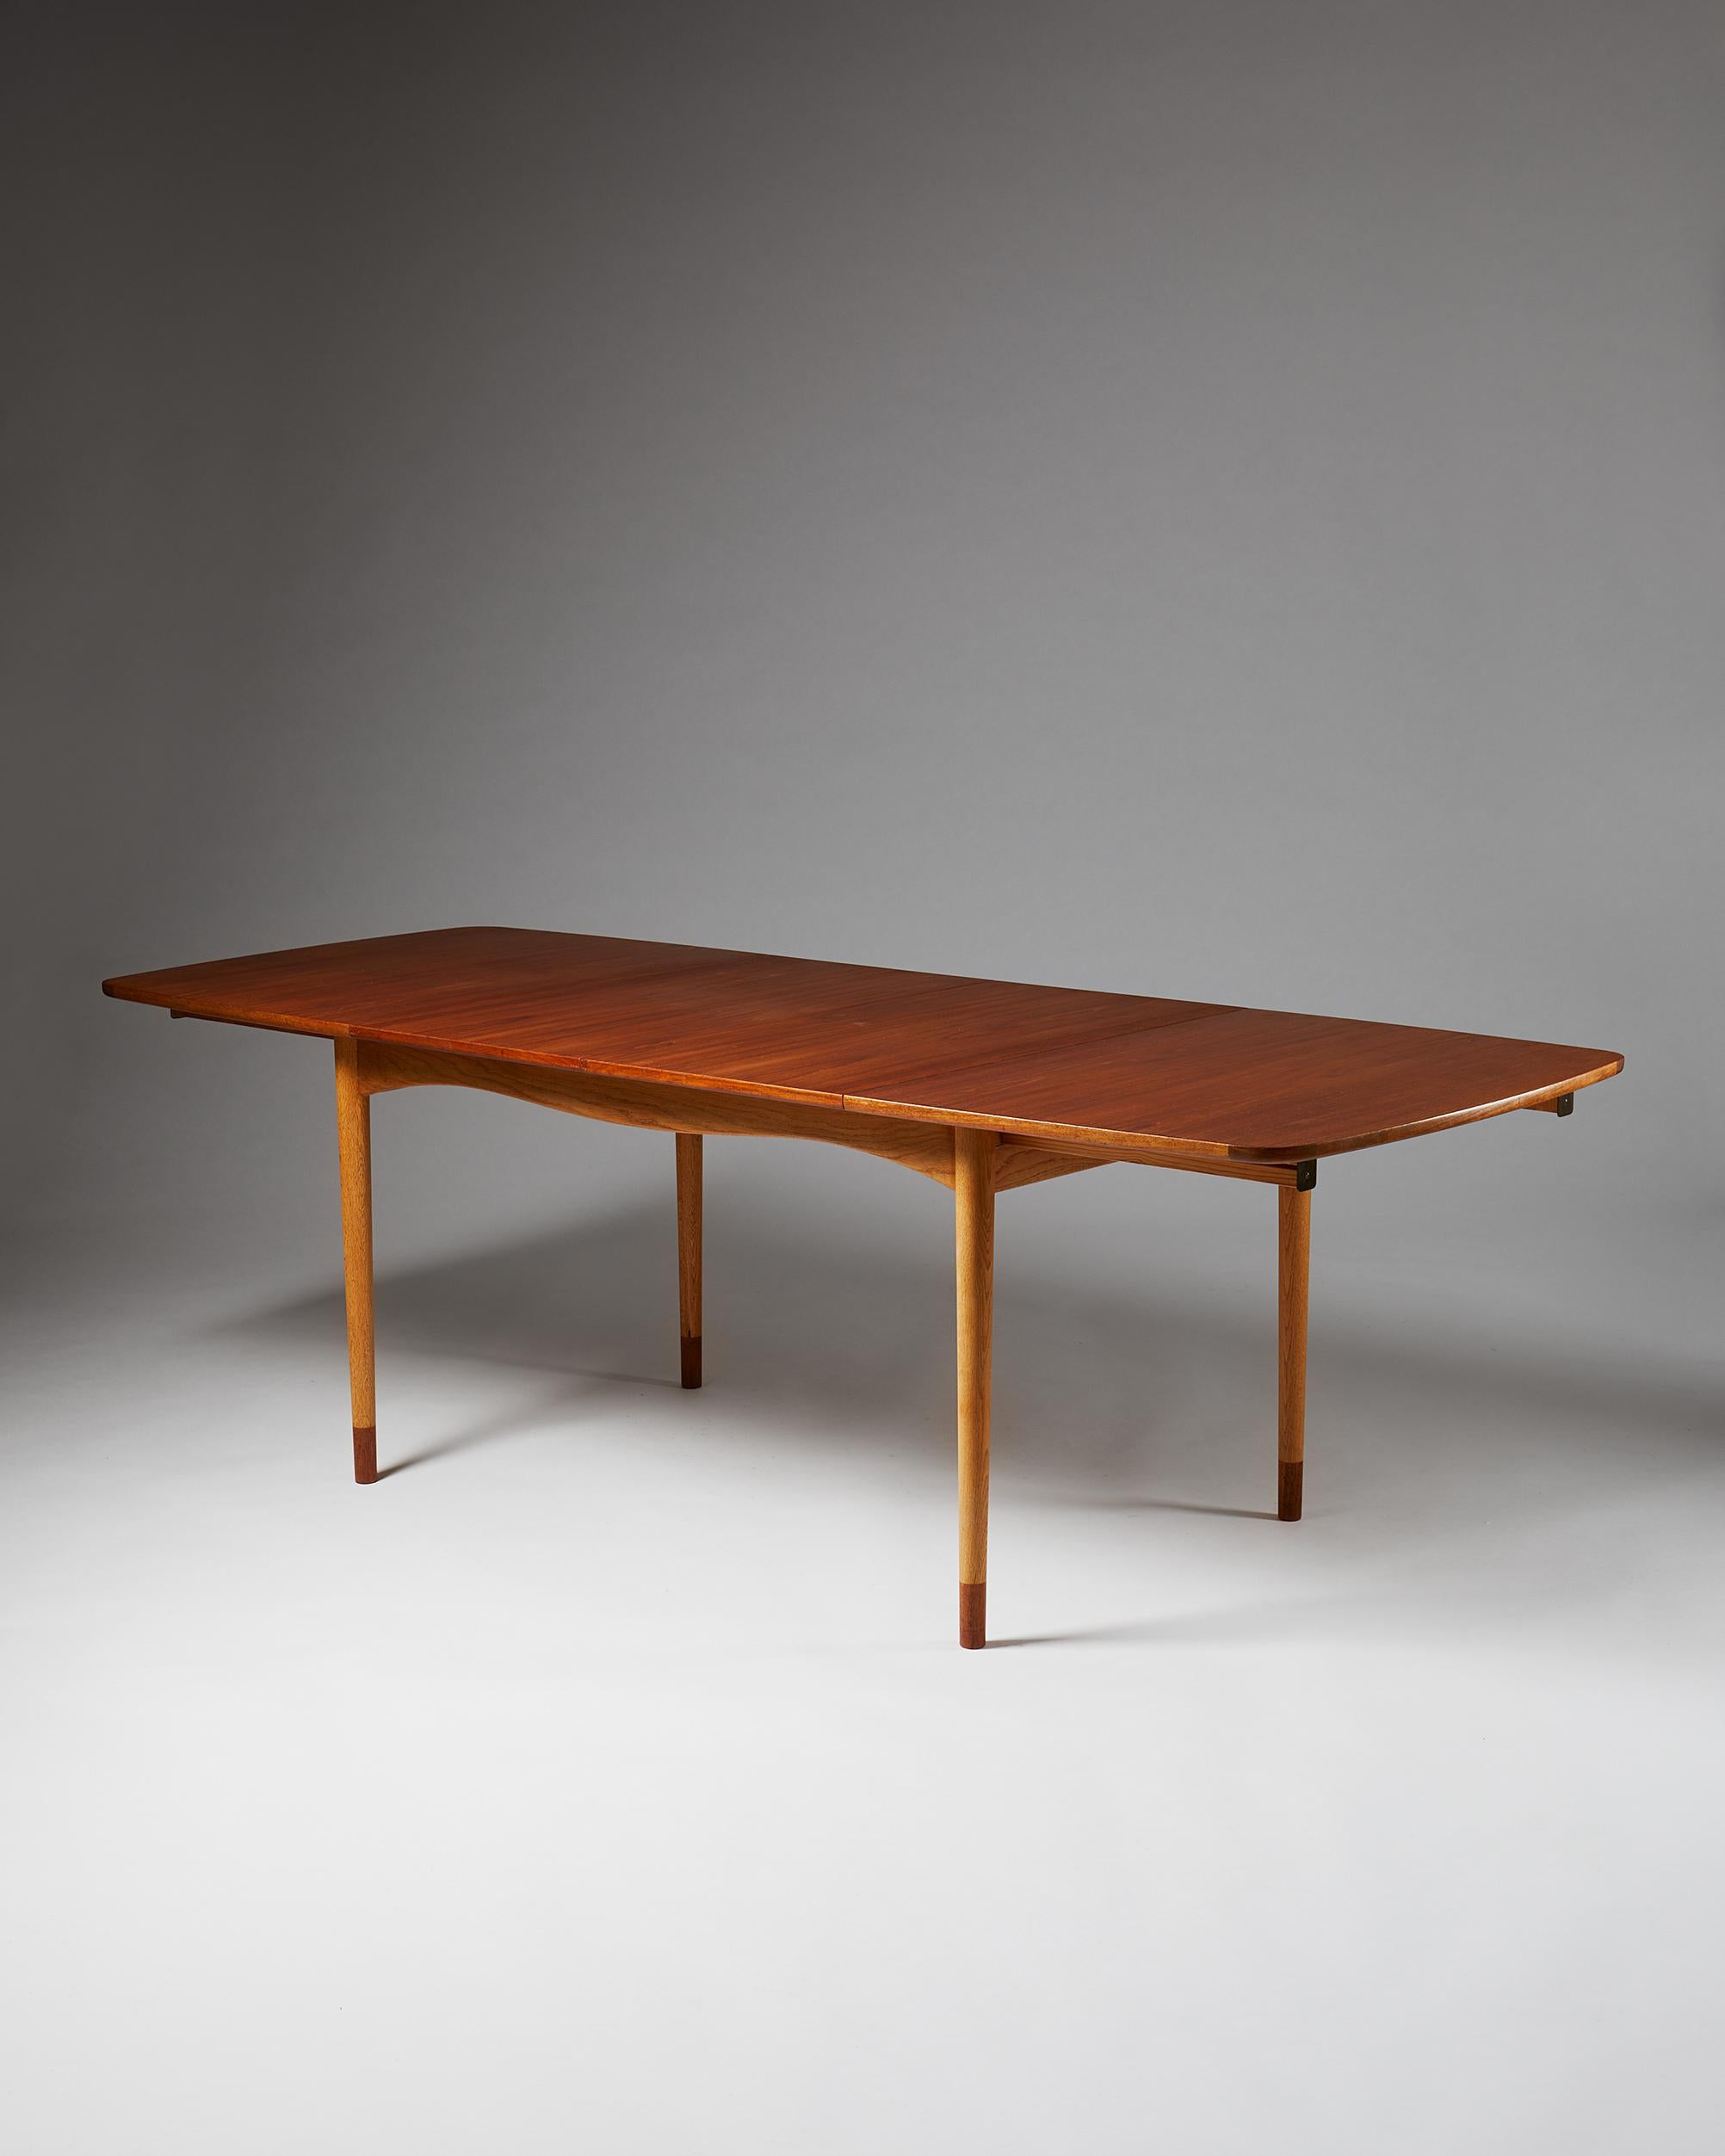 Solid oak frame, table top and extension leaves in teak.


Measures: H 73.5 cm/ 2' 5